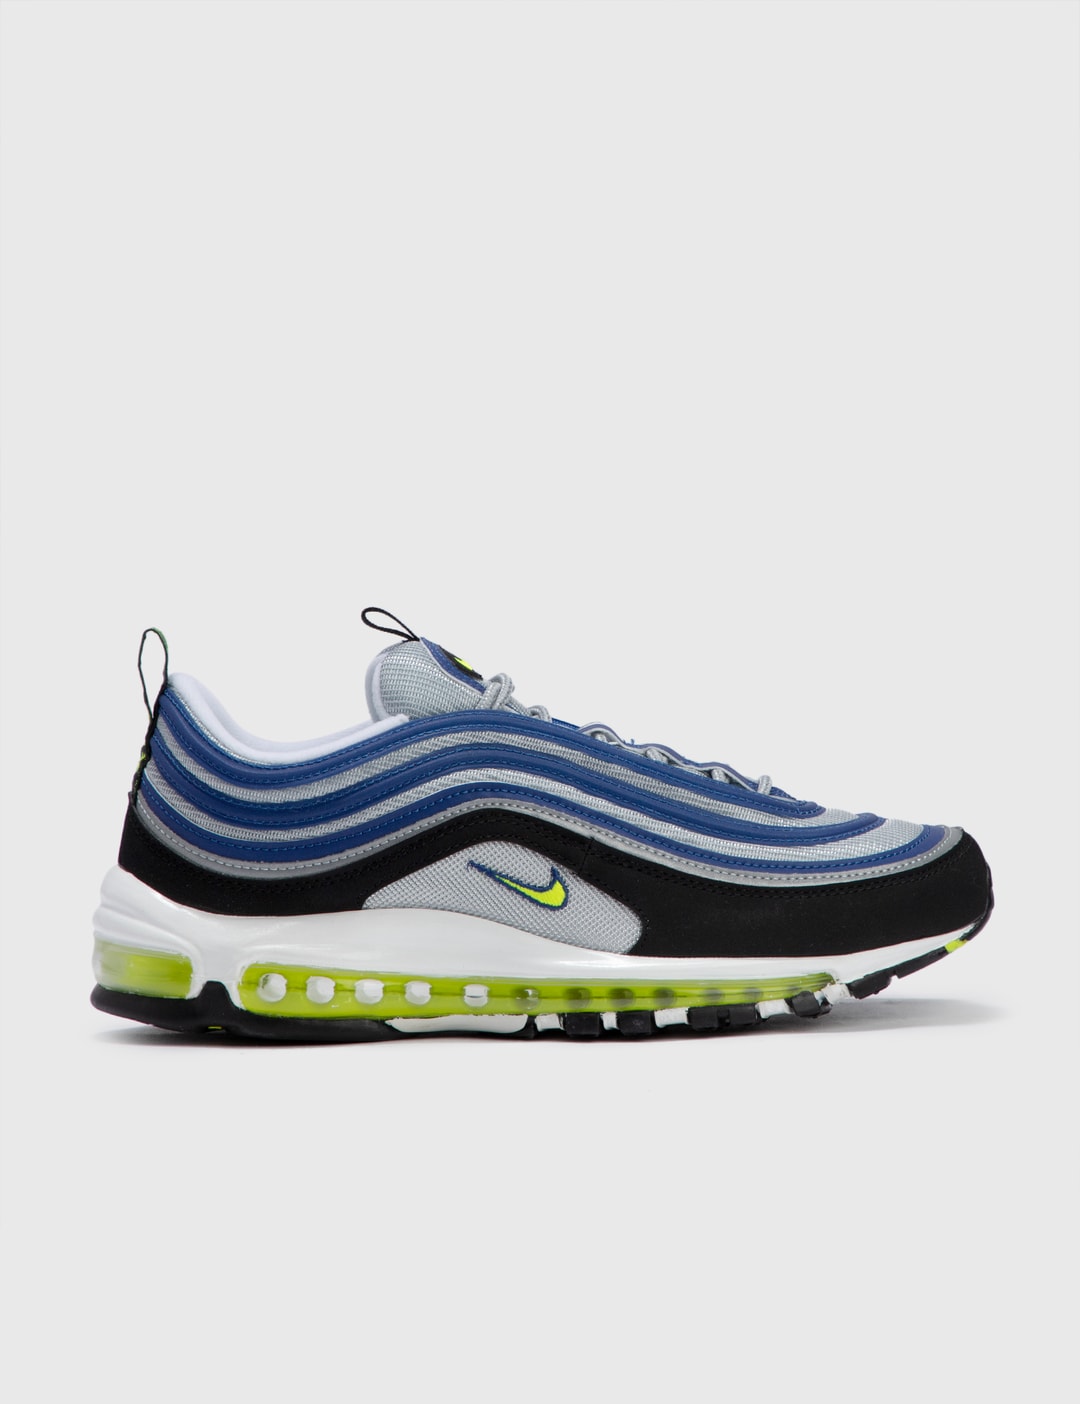 steno Pittig Verhandeling Nike - Nike Air Max 97 OG | HBX - Globally Curated Fashion and Lifestyle by  Hypebeast